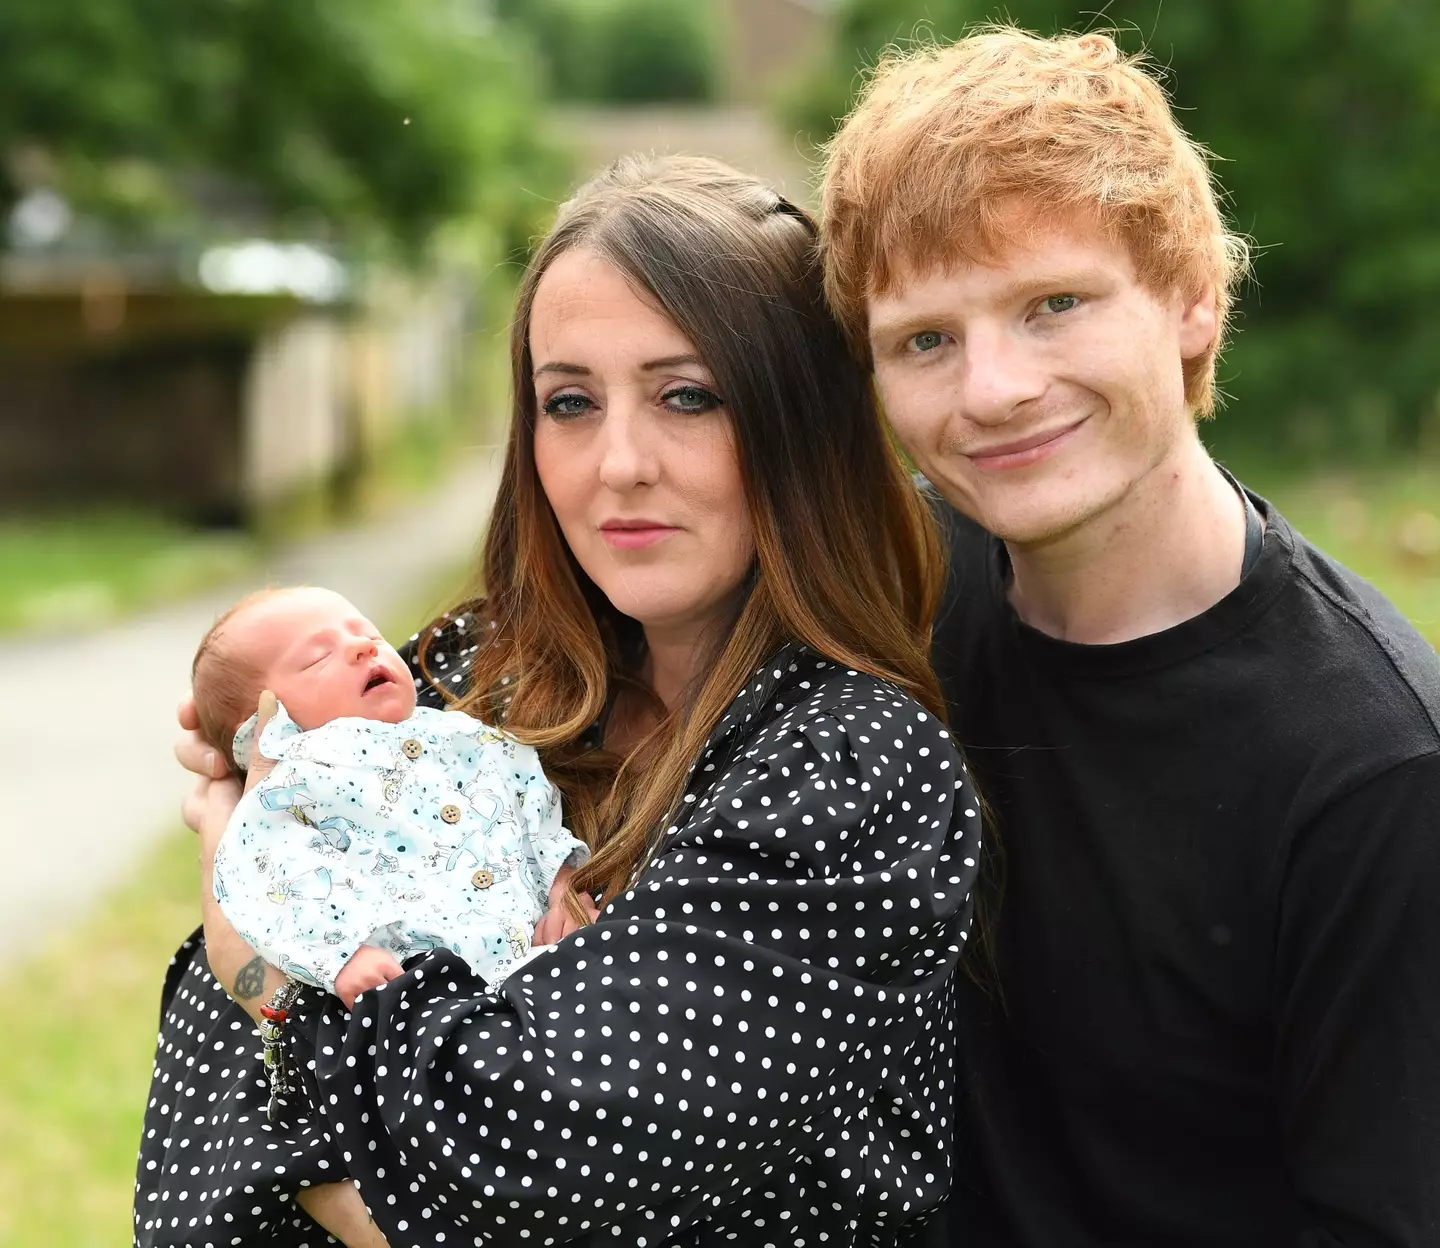 The couple are besotted by their newborn.